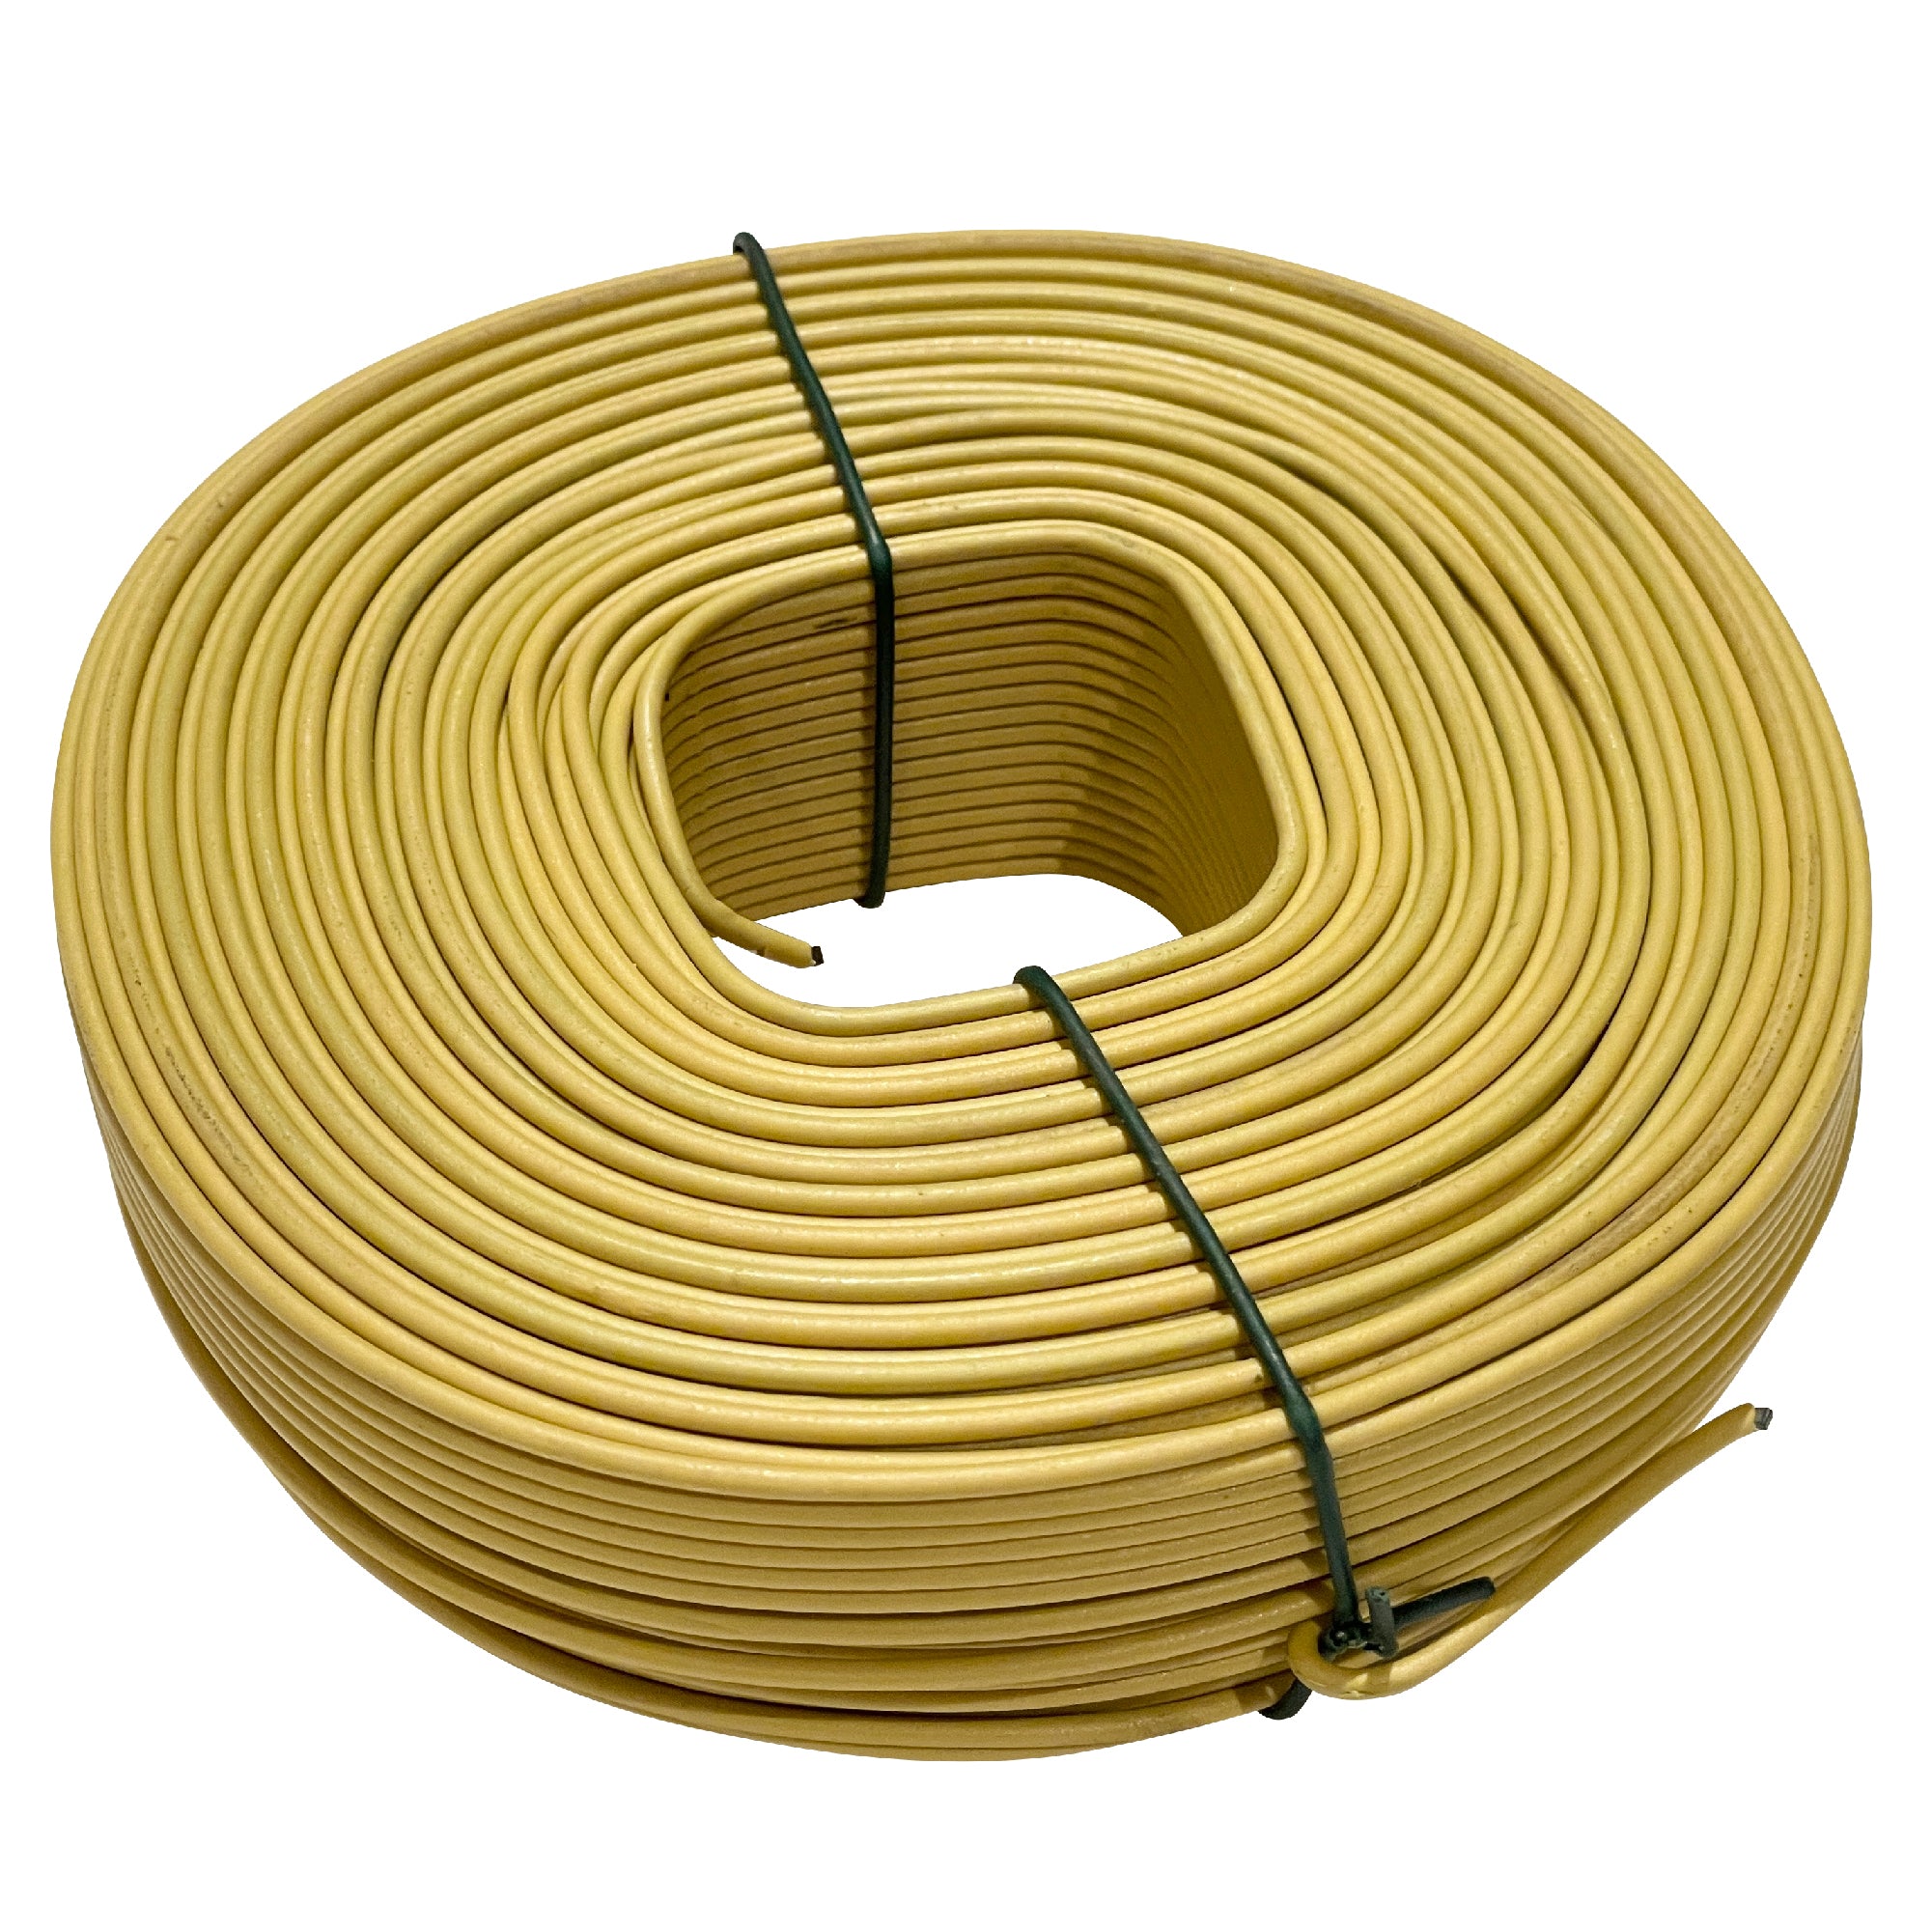 Sandbaggy PVC Coated Rebar Tie Wire Roll 16 Gauge | Yellow Rust-Proof |  Works With Plastic Epoxy Rebar | Approx. 300 ft Roll, 3 lbs Pack of 1 